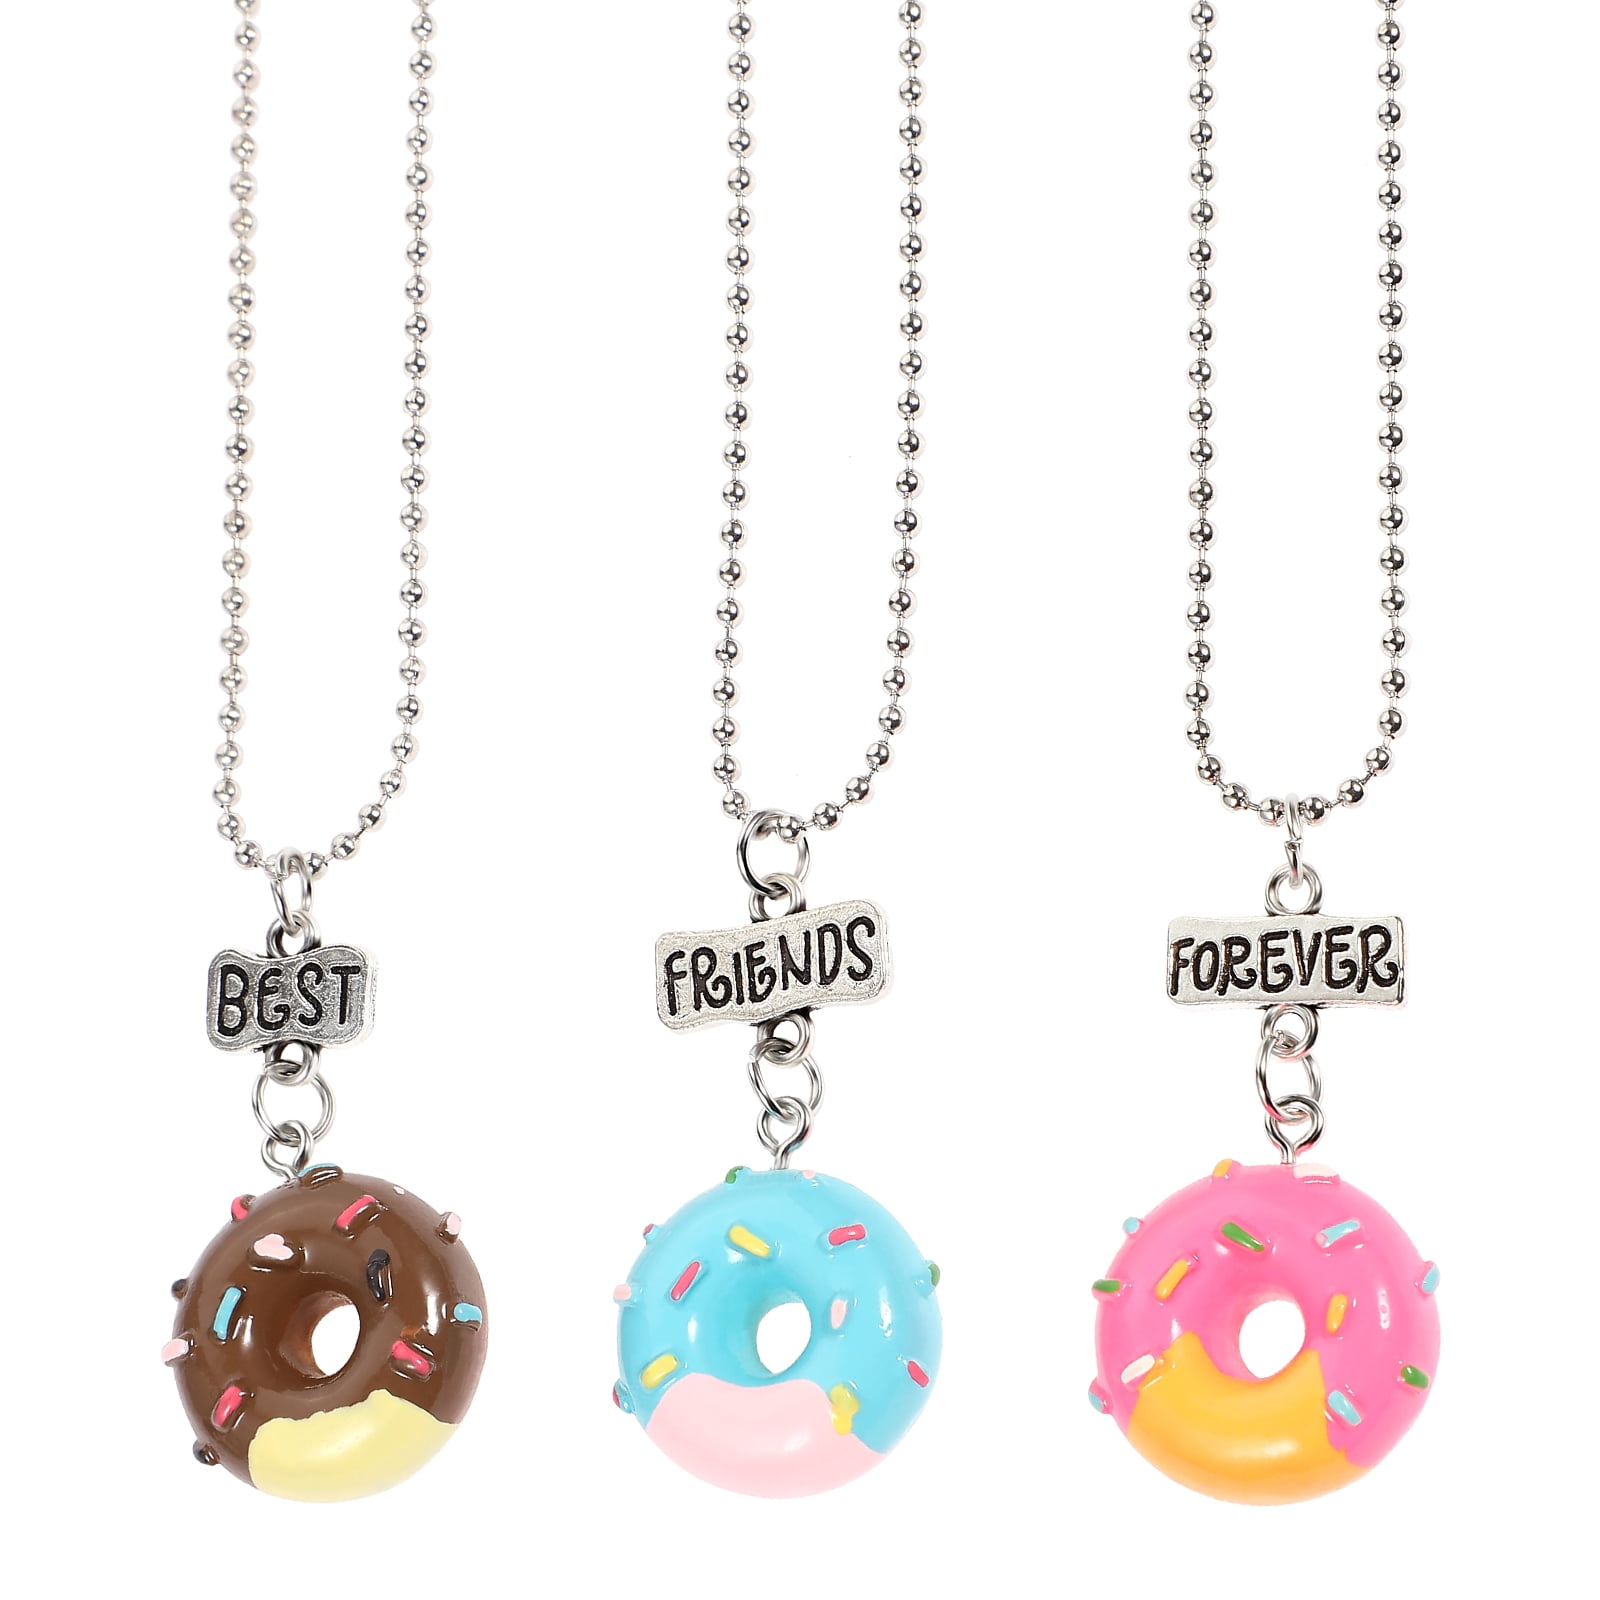 2PCS BFF Magnetic Necklaces, Lovely Unicorn Pendant Friendship Necklaces  for 2 Girls, Best Friends Forever Necklace, Valentine Friendship Jewelry  Gifts for Friends Kids Mother Sisters Girls Women : Amazon.co.uk: Fashion